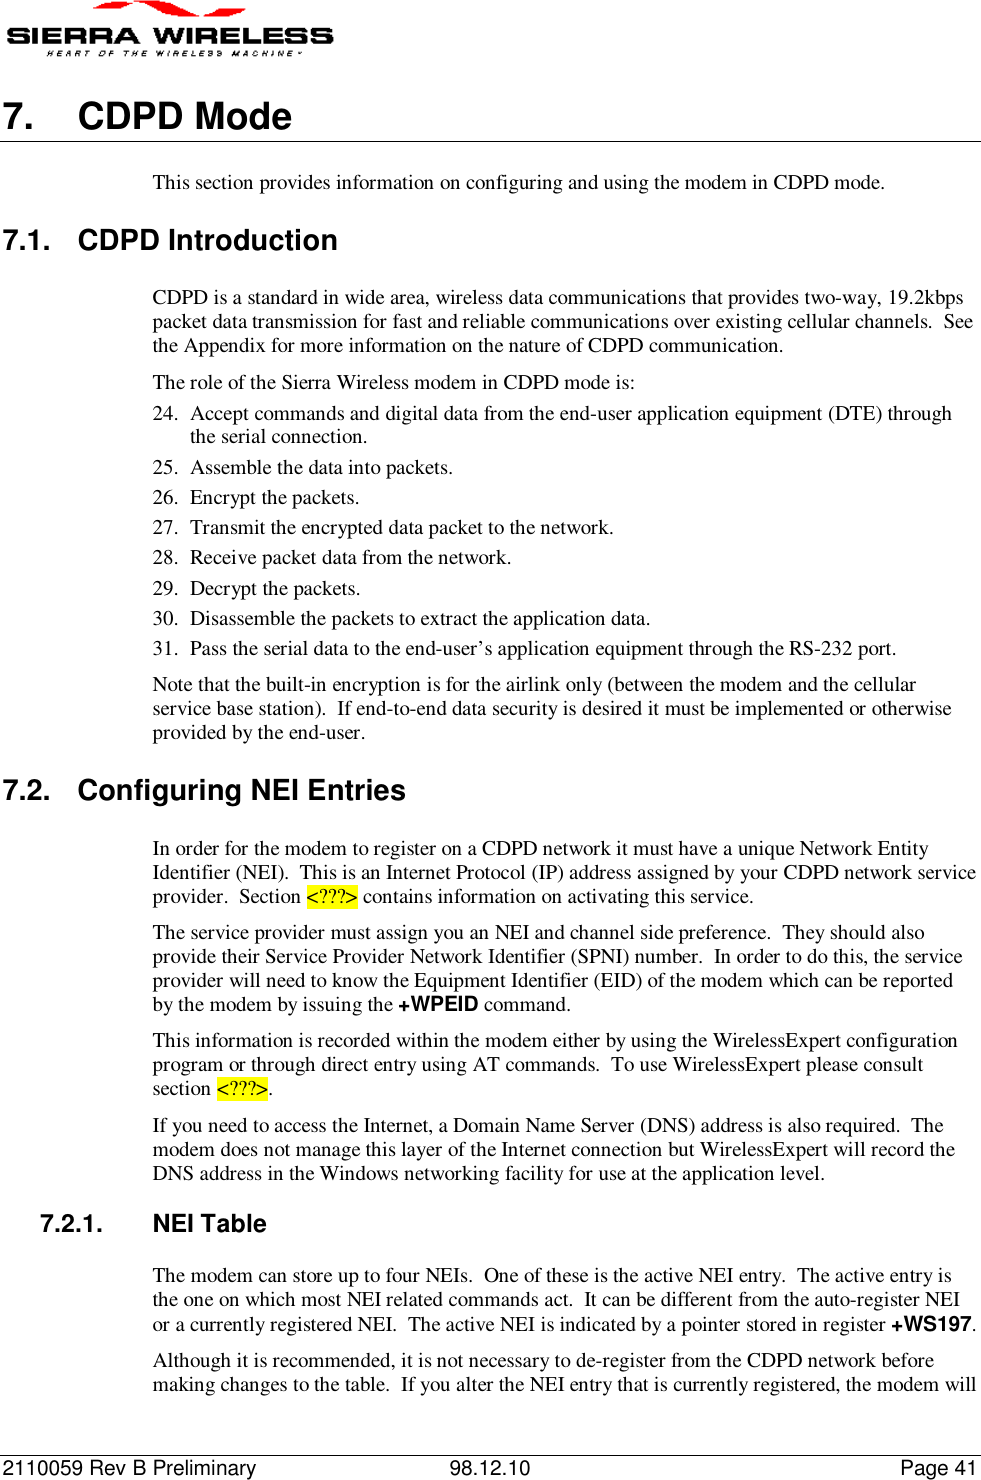 2110059 Rev B Preliminary 98.12.10 Page 417.  CDPD ModeThis section provides information on configuring and using the modem in CDPD mode.7.1.  CDPD IntroductionCDPD is a standard in wide area, wireless data communications that provides two-way, 19.2kbpspacket data transmission for fast and reliable communications over existing cellular channels.  Seethe Appendix for more information on the nature of CDPD communication.The role of the Sierra Wireless modem in CDPD mode is:24. Accept commands and digital data from the end-user application equipment (DTE) throughthe serial connection.25. Assemble the data into packets.26. Encrypt the packets.27. Transmit the encrypted data packet to the network.28. Receive packet data from the network.29. Decrypt the packets.30. Disassemble the packets to extract the application data.31. Pass the serial data to the end-user’s application equipment through the RS-232 port.Note that the built-in encryption is for the airlink only (between the modem and the cellularservice base station).  If end-to-end data security is desired it must be implemented or otherwiseprovided by the end-user.7.2.  Configuring NEI EntriesIn order for the modem to register on a CDPD network it must have a unique Network EntityIdentifier (NEI).  This is an Internet Protocol (IP) address assigned by your CDPD network serviceprovider.  Section &lt;???&gt; contains information on activating this service.The service provider must assign you an NEI and channel side preference.  They should alsoprovide their Service Provider Network Identifier (SPNI) number.  In order to do this, the serviceprovider will need to know the Equipment Identifier (EID) of the modem which can be reportedby the modem by issuing the +WPEID command.This information is recorded within the modem either by using the WirelessExpert configurationprogram or through direct entry using AT commands.  To use WirelessExpert please consultsection &lt;???&gt;.If you need to access the Internet, a Domain Name Server (DNS) address is also required.  Themodem does not manage this layer of the Internet connection but WirelessExpert will record theDNS address in the Windows networking facility for use at the application level.7.2.1. NEI TableThe modem can store up to four NEIs.  One of these is the active NEI entry.  The active entry isthe one on which most NEI related commands act.  It can be different from the auto-register NEIor a currently registered NEI.  The active NEI is indicated by a pointer stored in register +WS197.Although it is recommended, it is not necessary to de-register from the CDPD network beforemaking changes to the table.  If you alter the NEI entry that is currently registered, the modem will